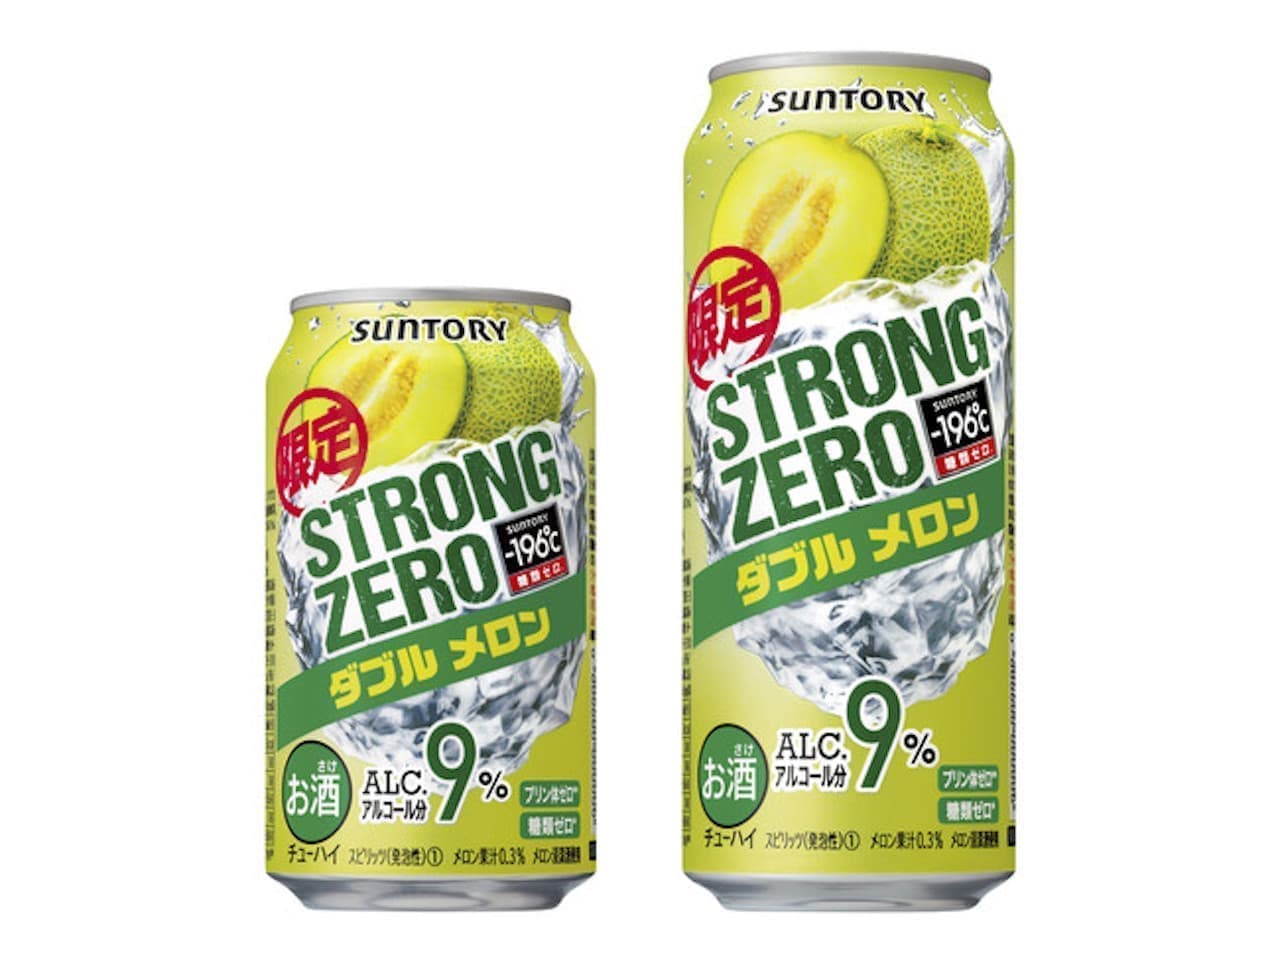 "-196 ℃ Strong Zero [Double Melon]" for a limited time